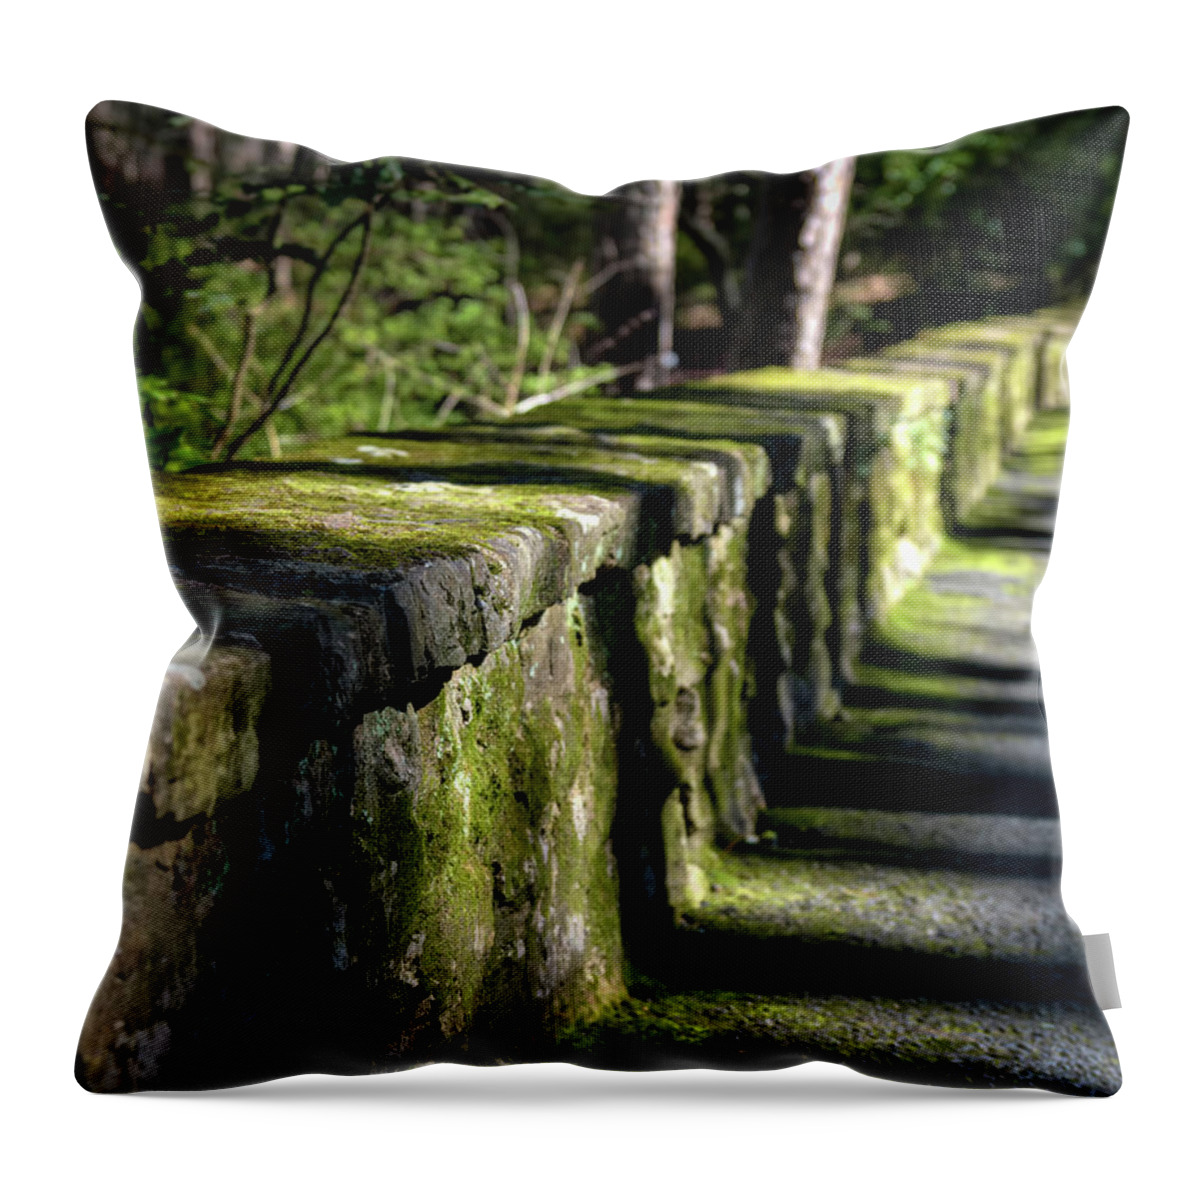 Stone Wall Throw Pillow featuring the photograph Green Stone Wall by James Barber